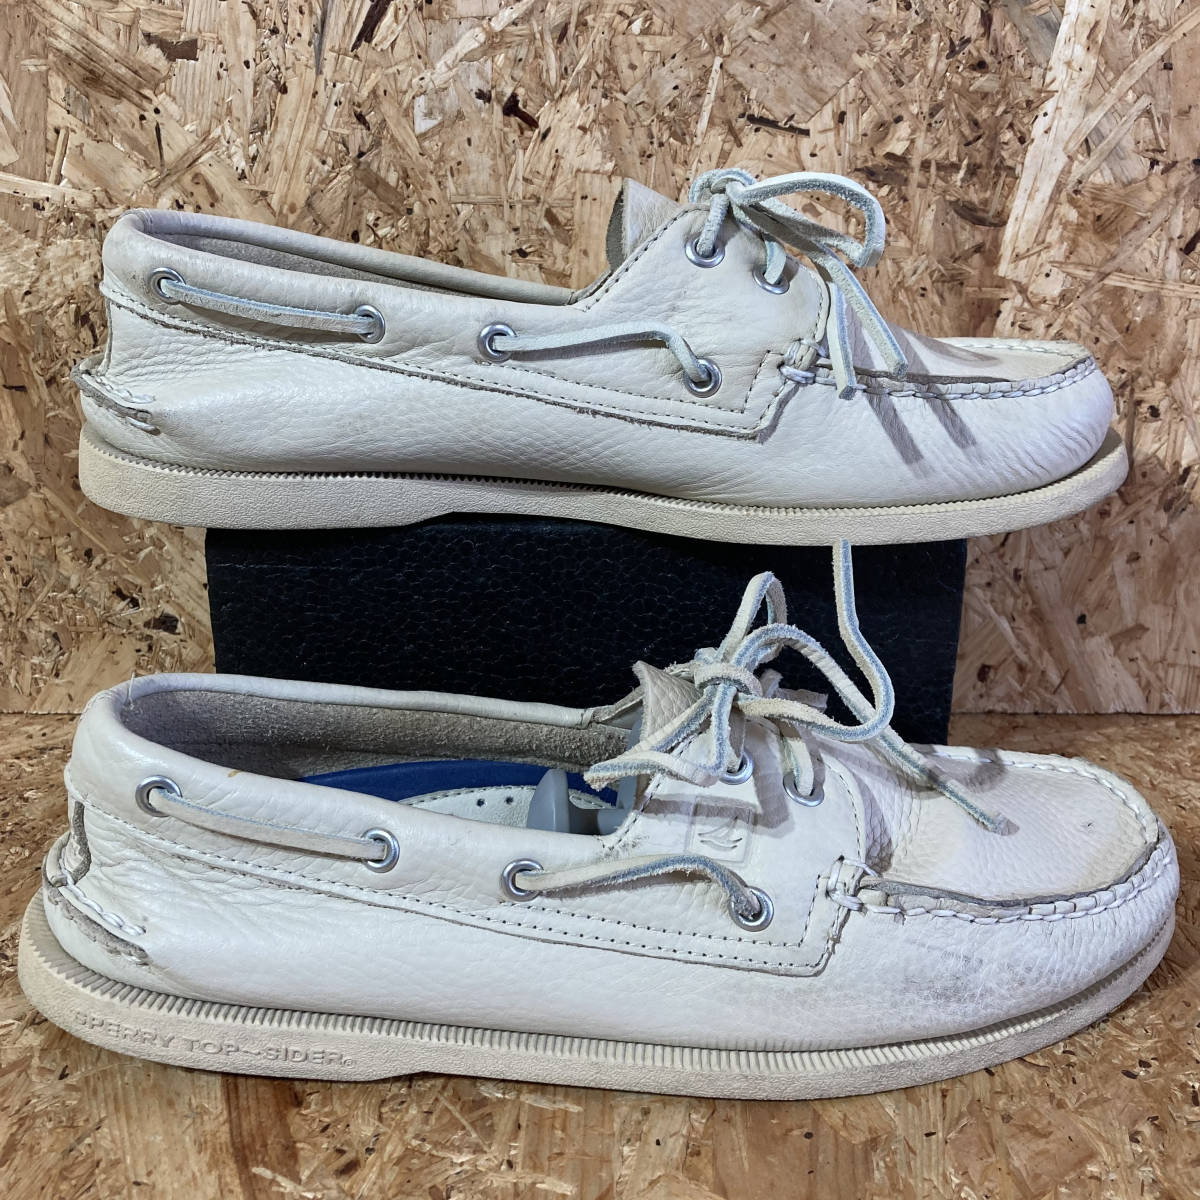 SPERRY TOP SIDER deck shoes US9s Perry верх носорог da-